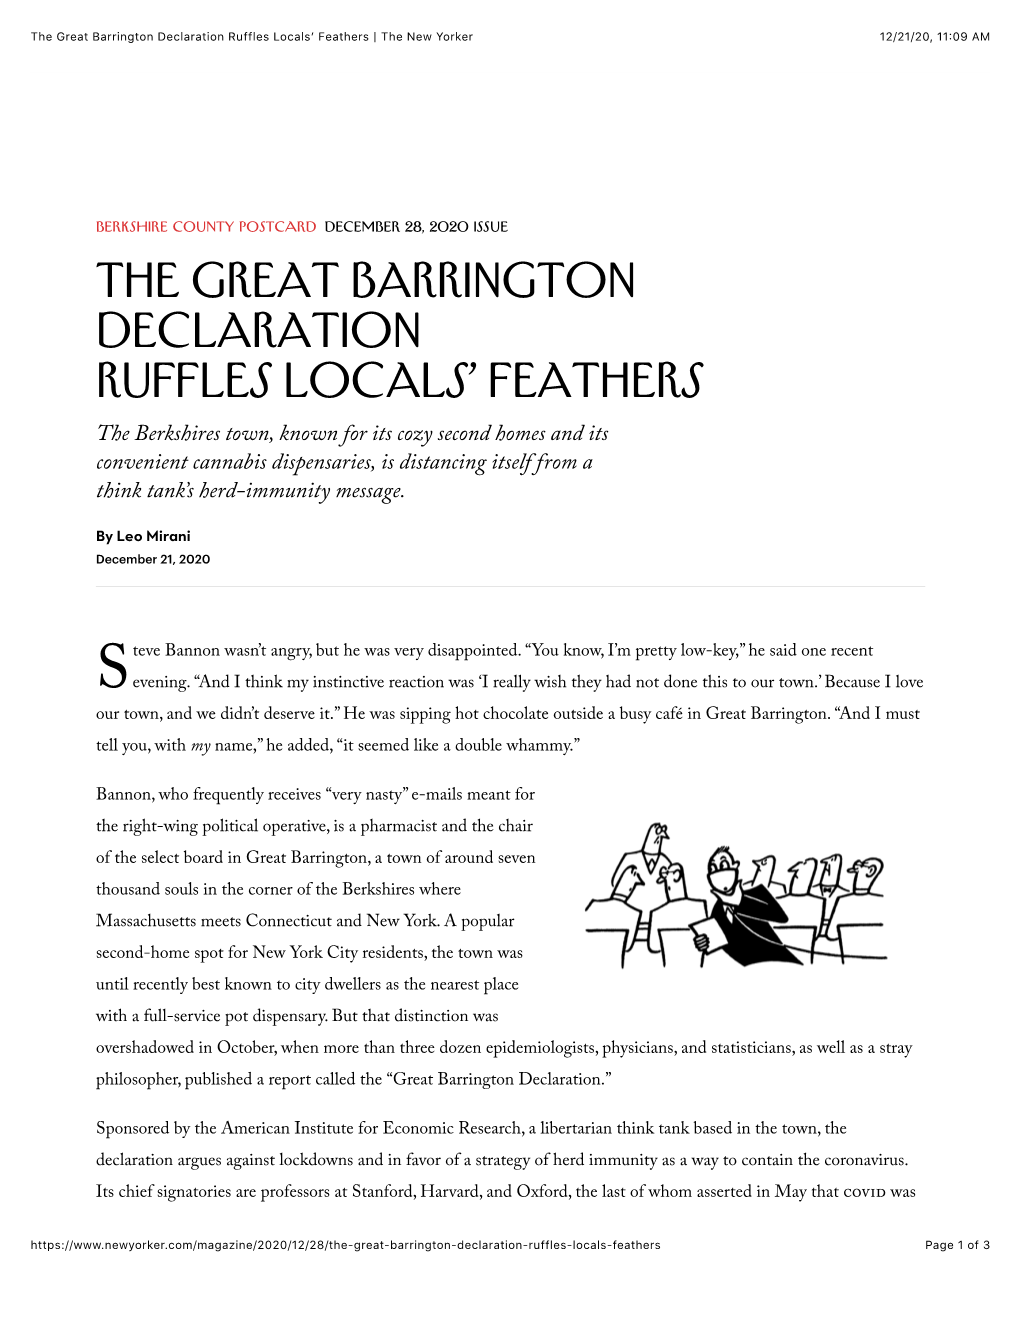 The Great Barrington Declaration Ruffles Locals’ Feathers | the New Yorker 12/21/20, 11:09 AM